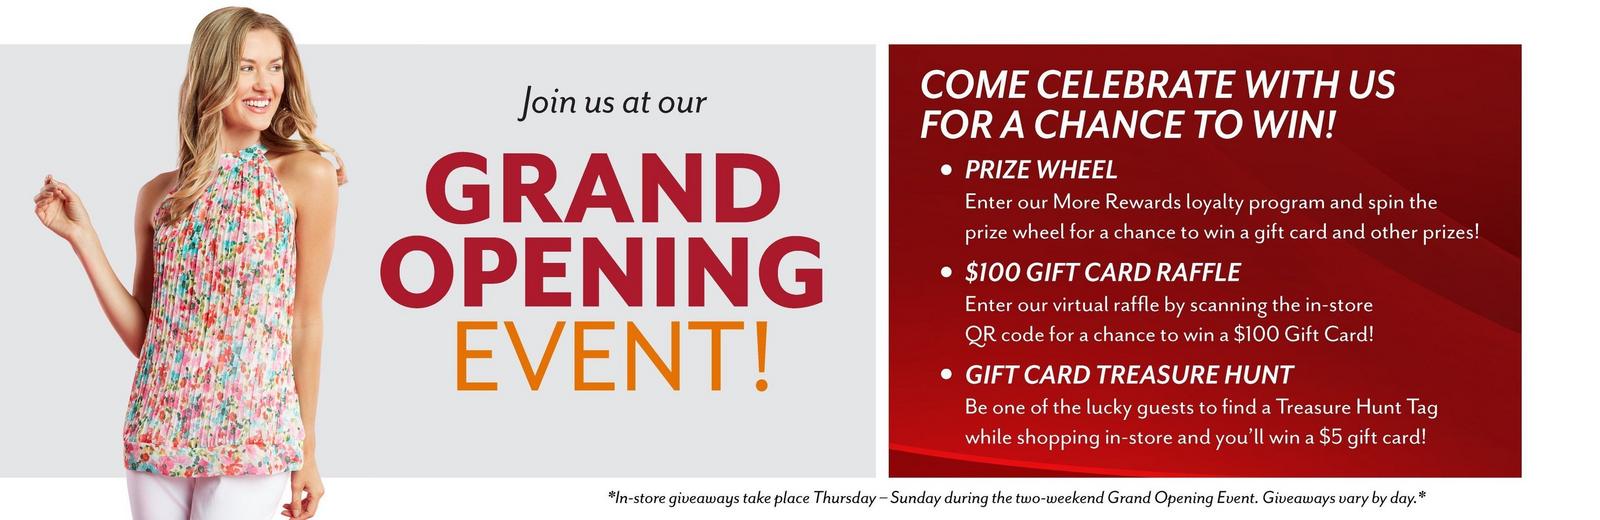 Grand Opening Celebrations at Burkes Outlet!